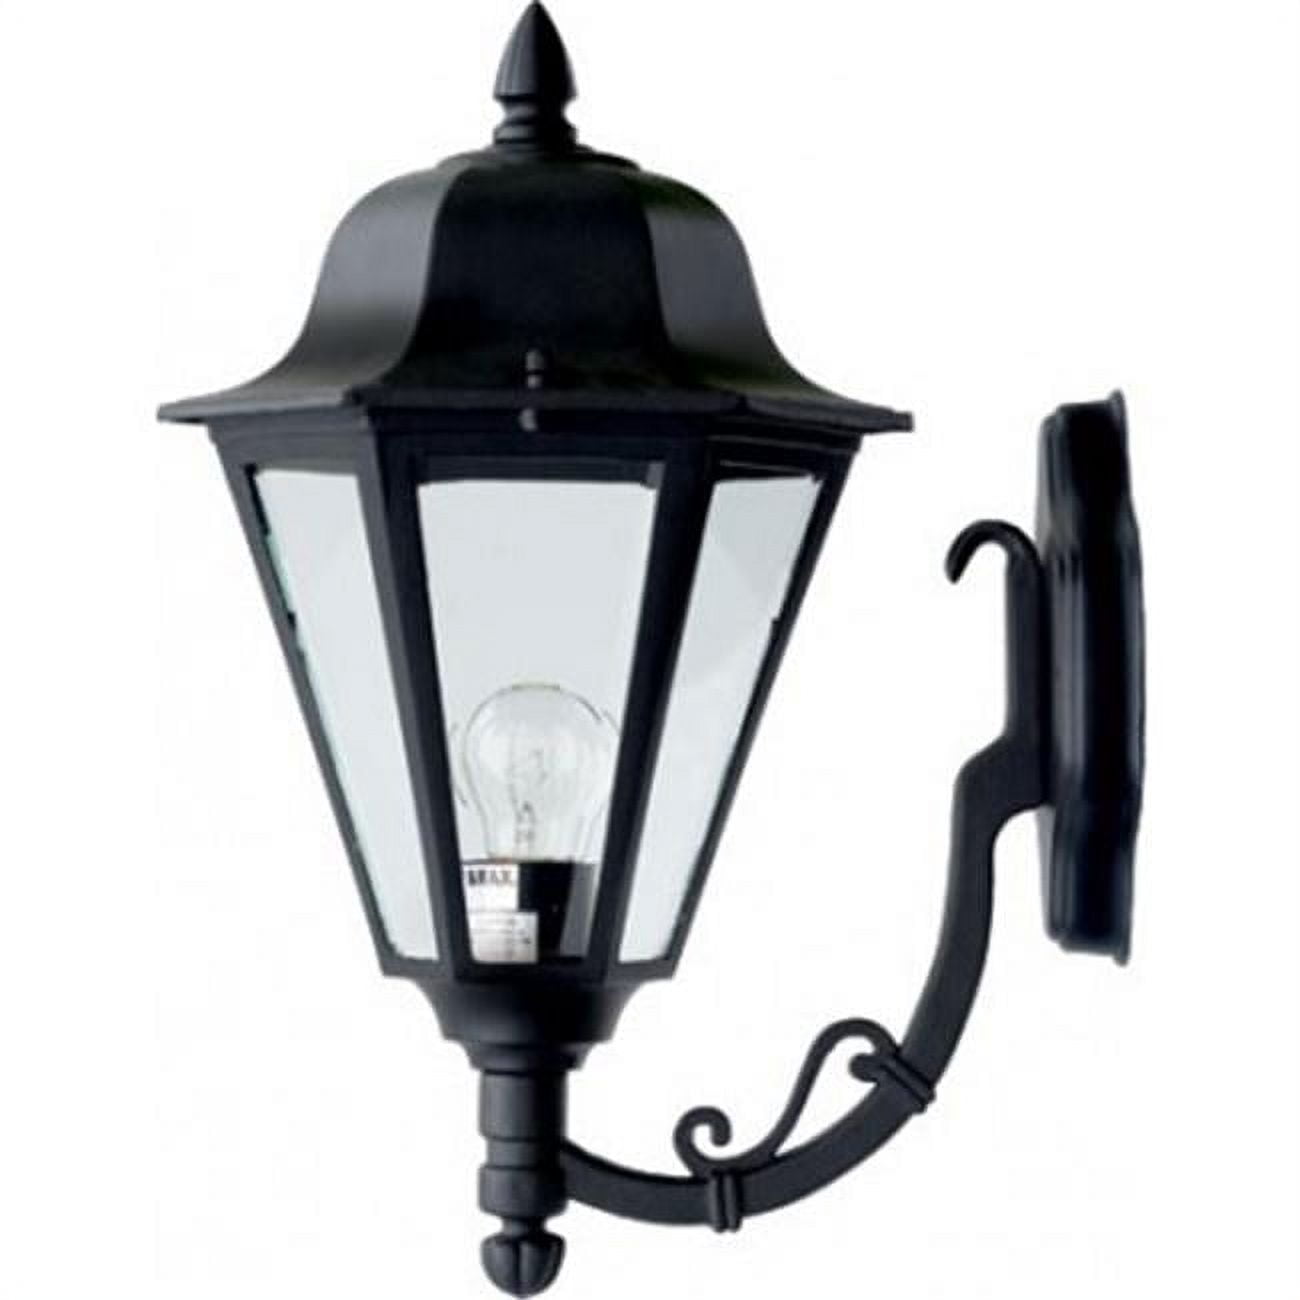 Picture of Dabmar Lighting GM135-LED16-B-FROST 16W & 85-265V LED Daniella Wall Light Fixture with Frosted Glass - Black